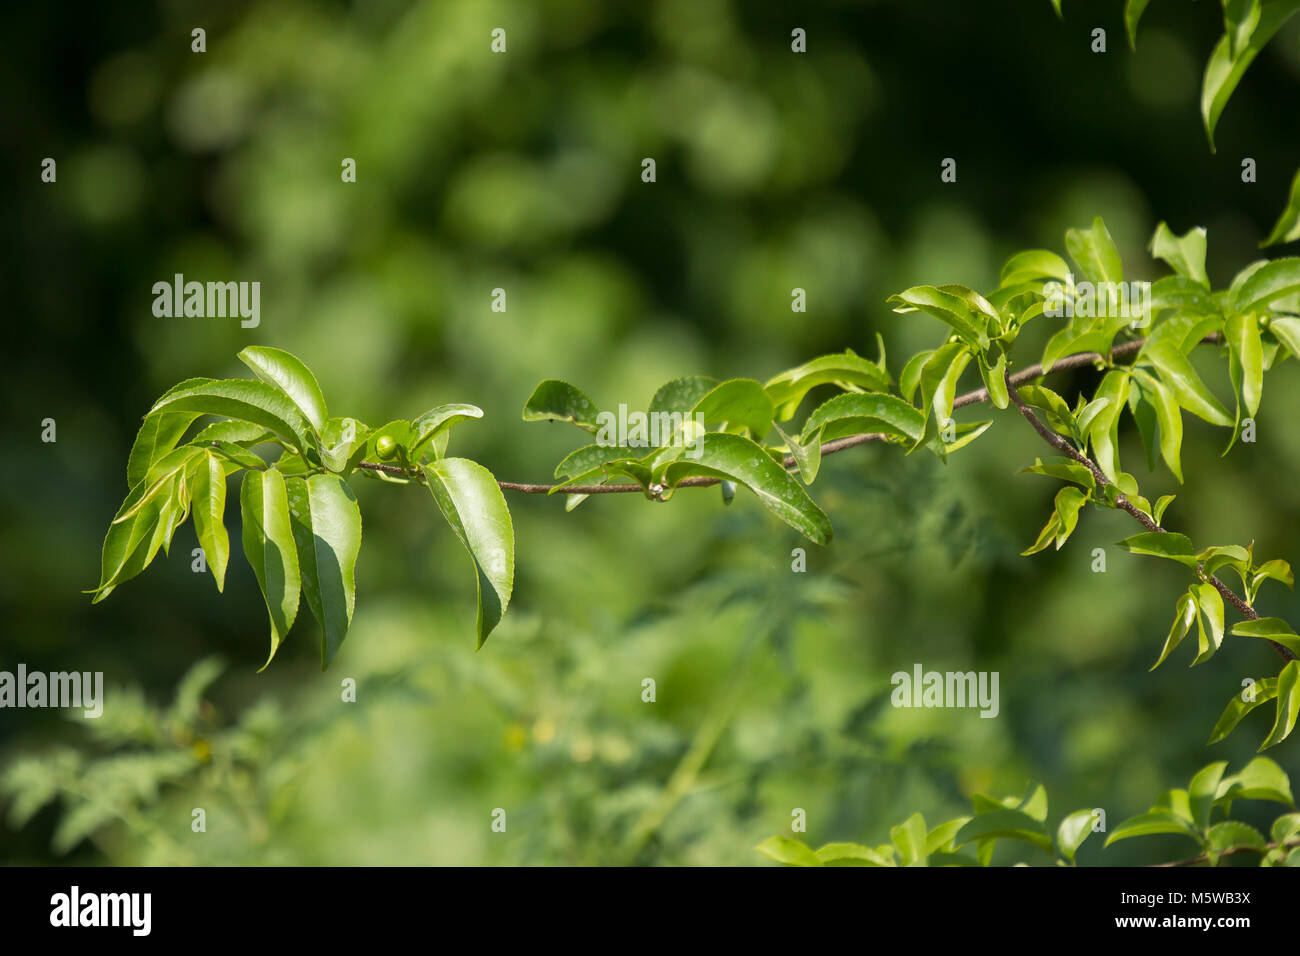 Green leaf of Fried Egg Tree  or  Oncoba spinosa Forssk. Stock Photo